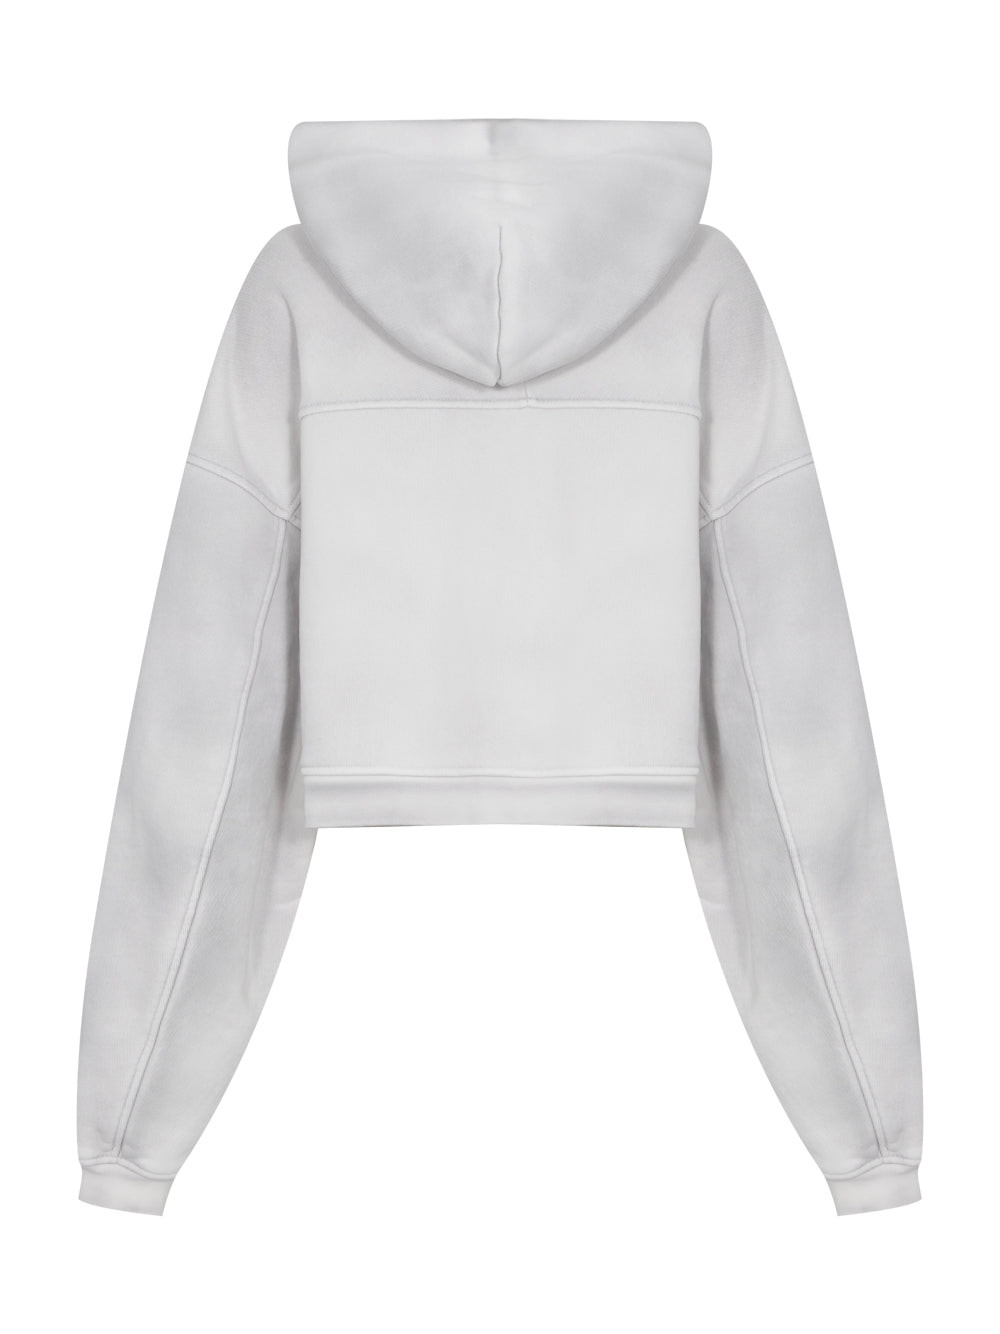 Cropped Zip Up Hoodie W/ Pigment Wash + Apple Puff Washed Smoke White